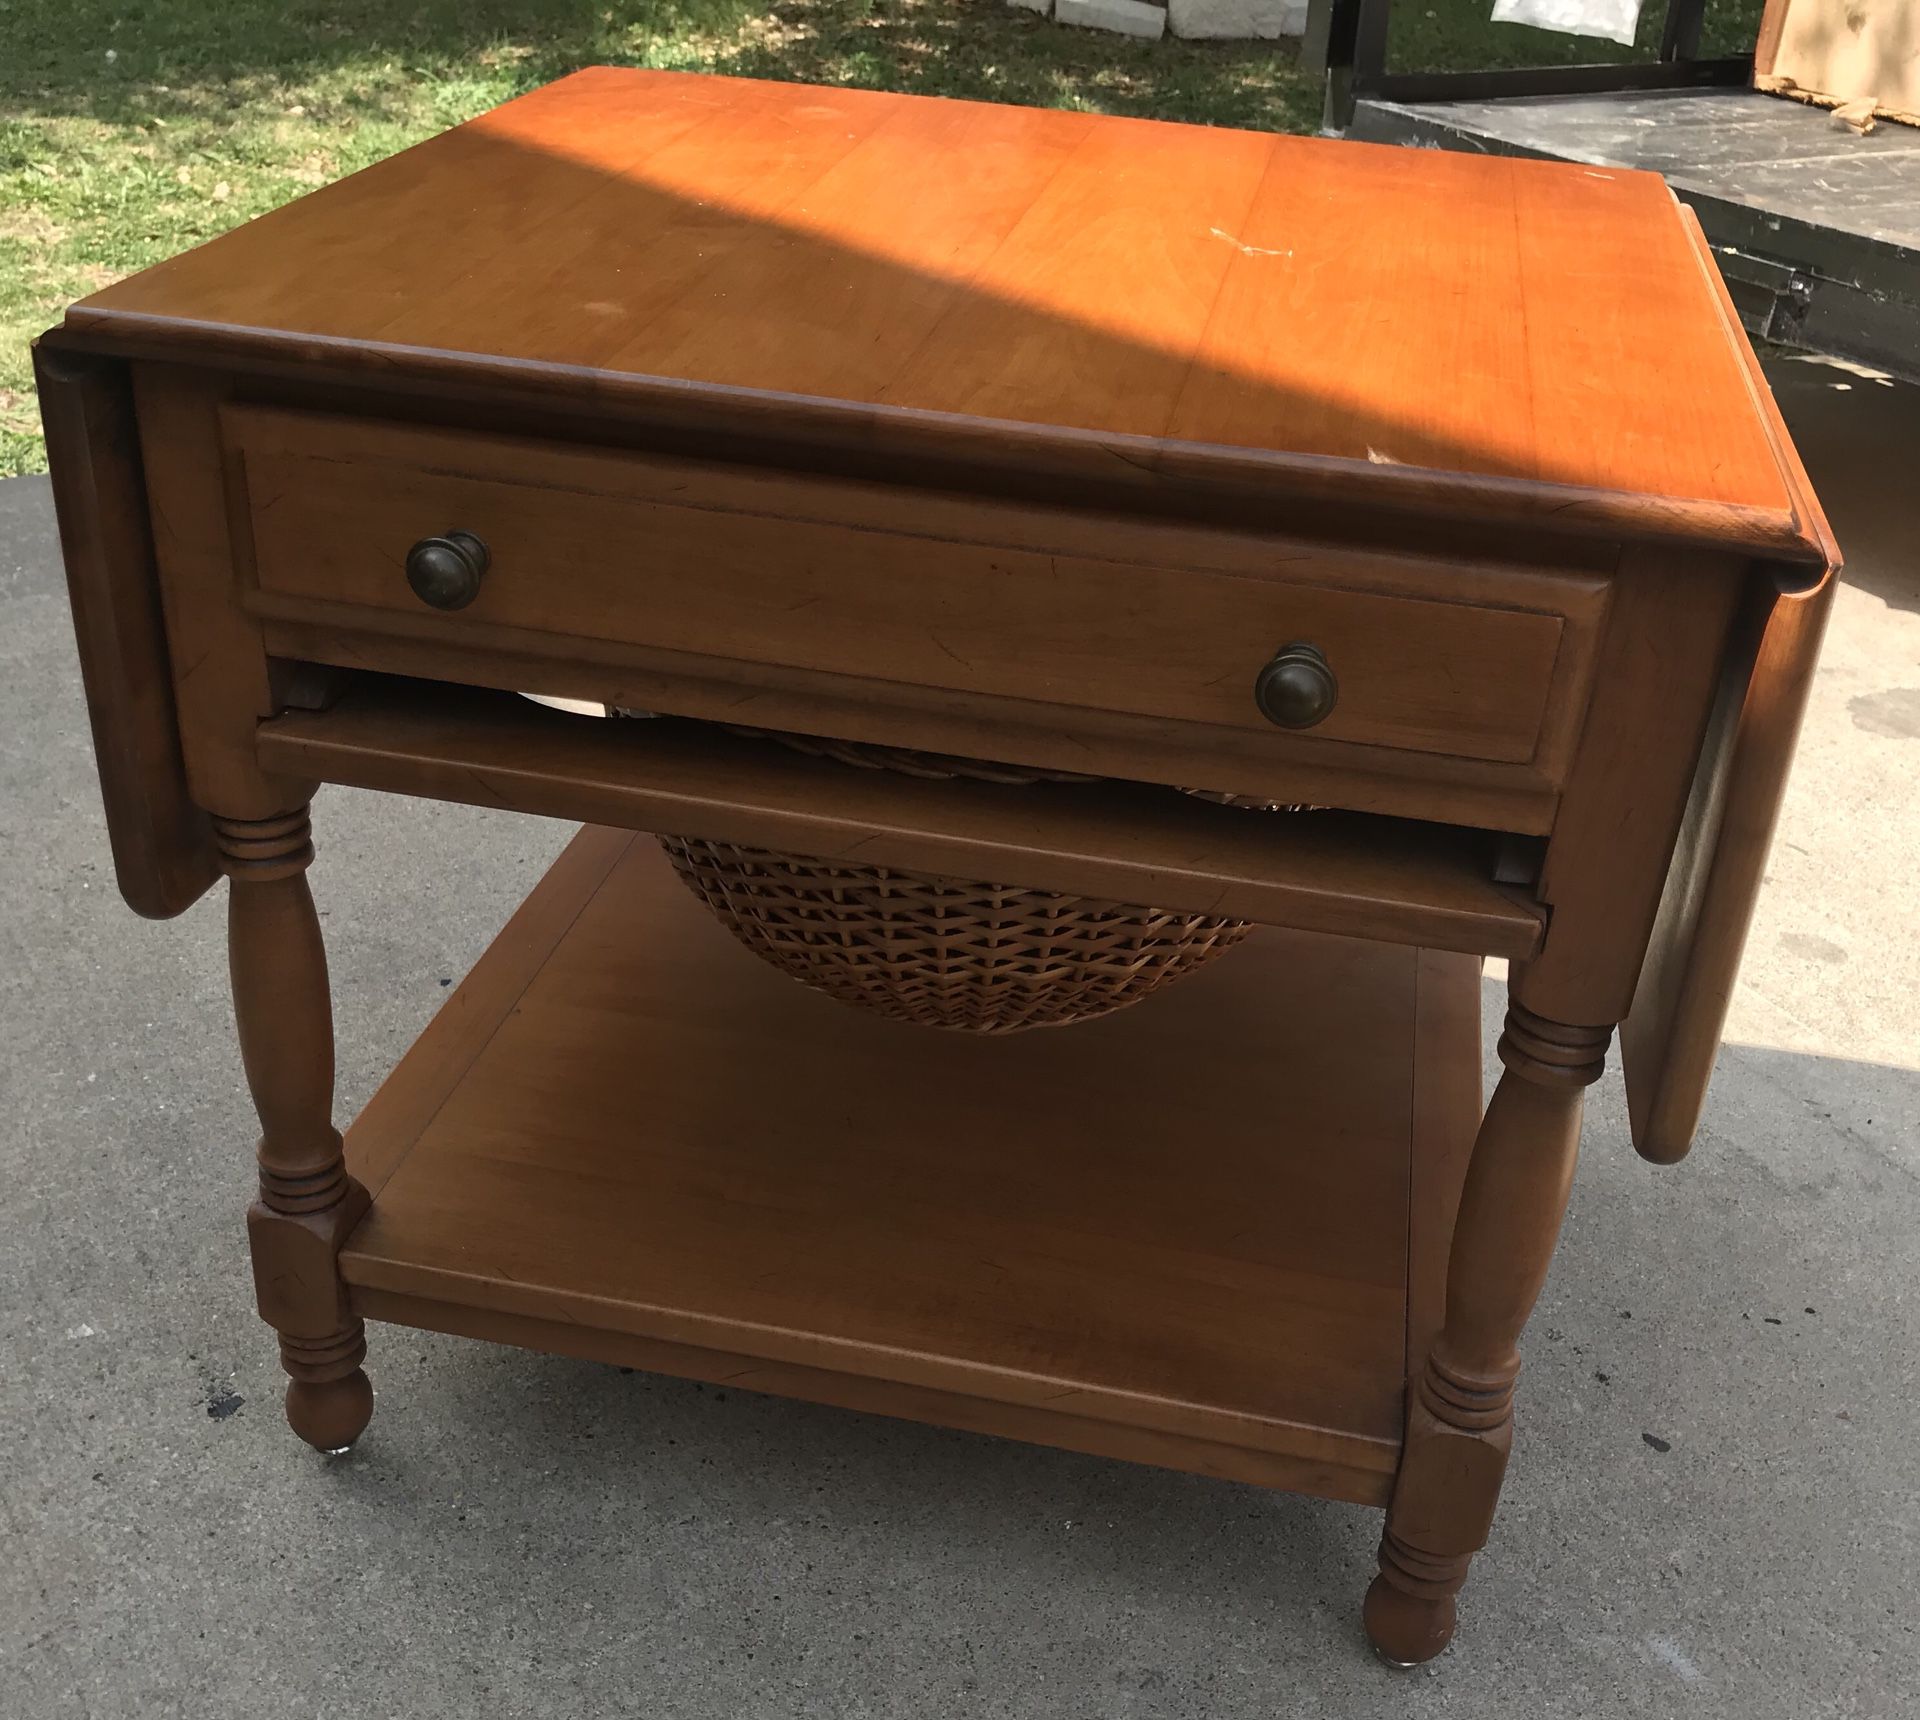 Vintage Conant Ball Accent Table / Side Table with Drop Leaf Sides and Storage Basket